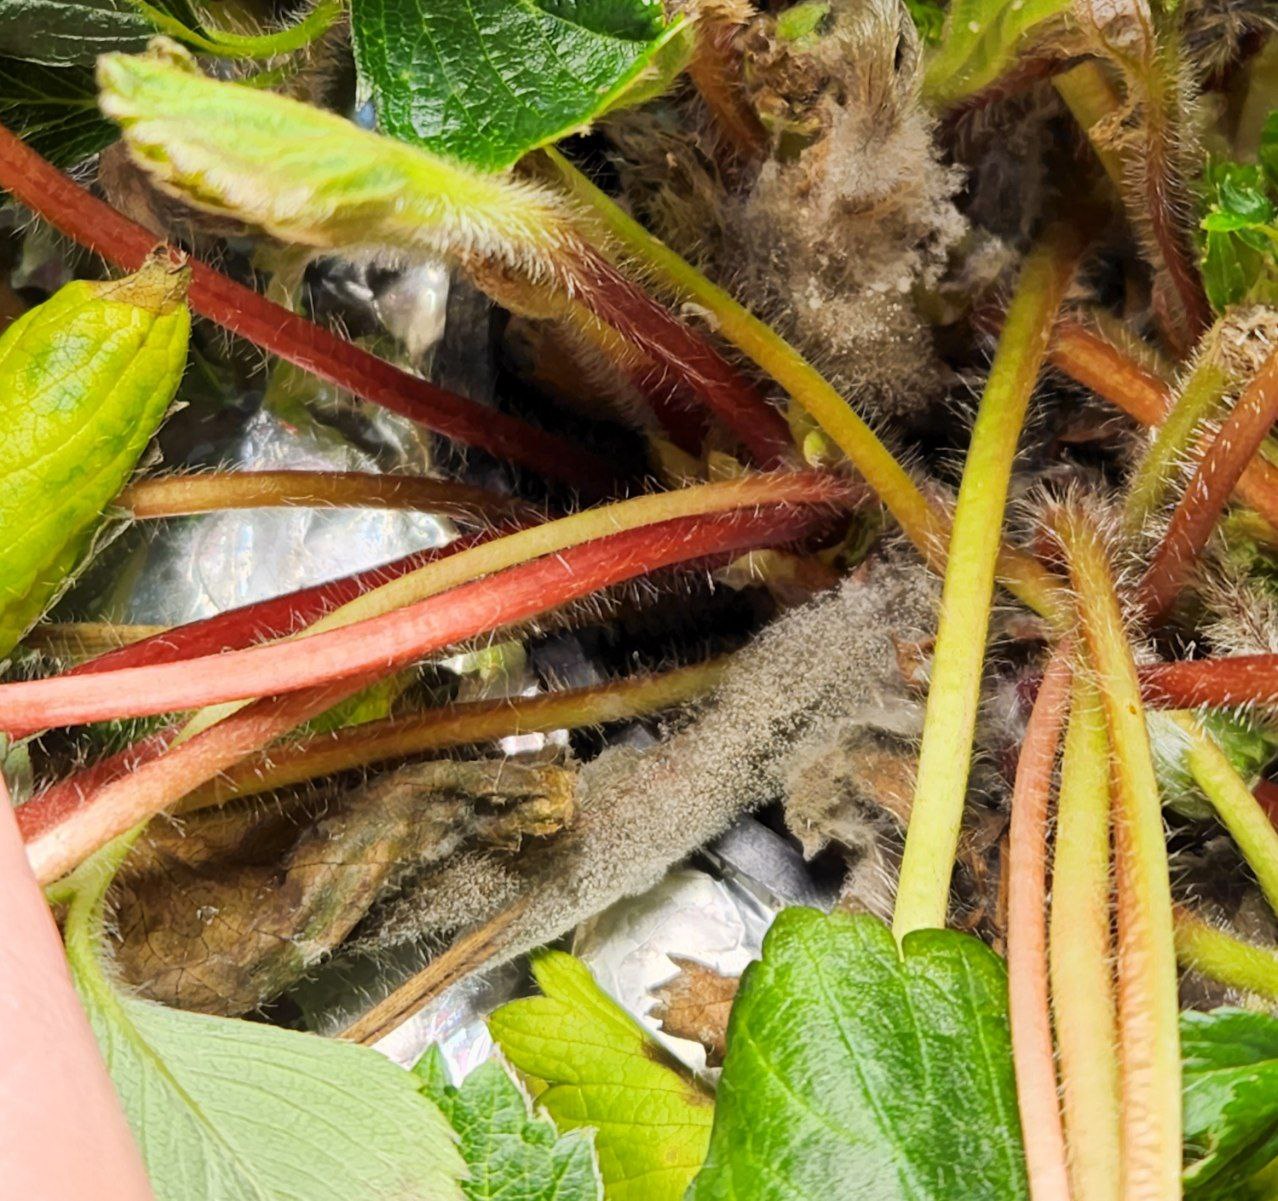 up close view of a strawberry plant crown covered in fuzzy grey mould spores